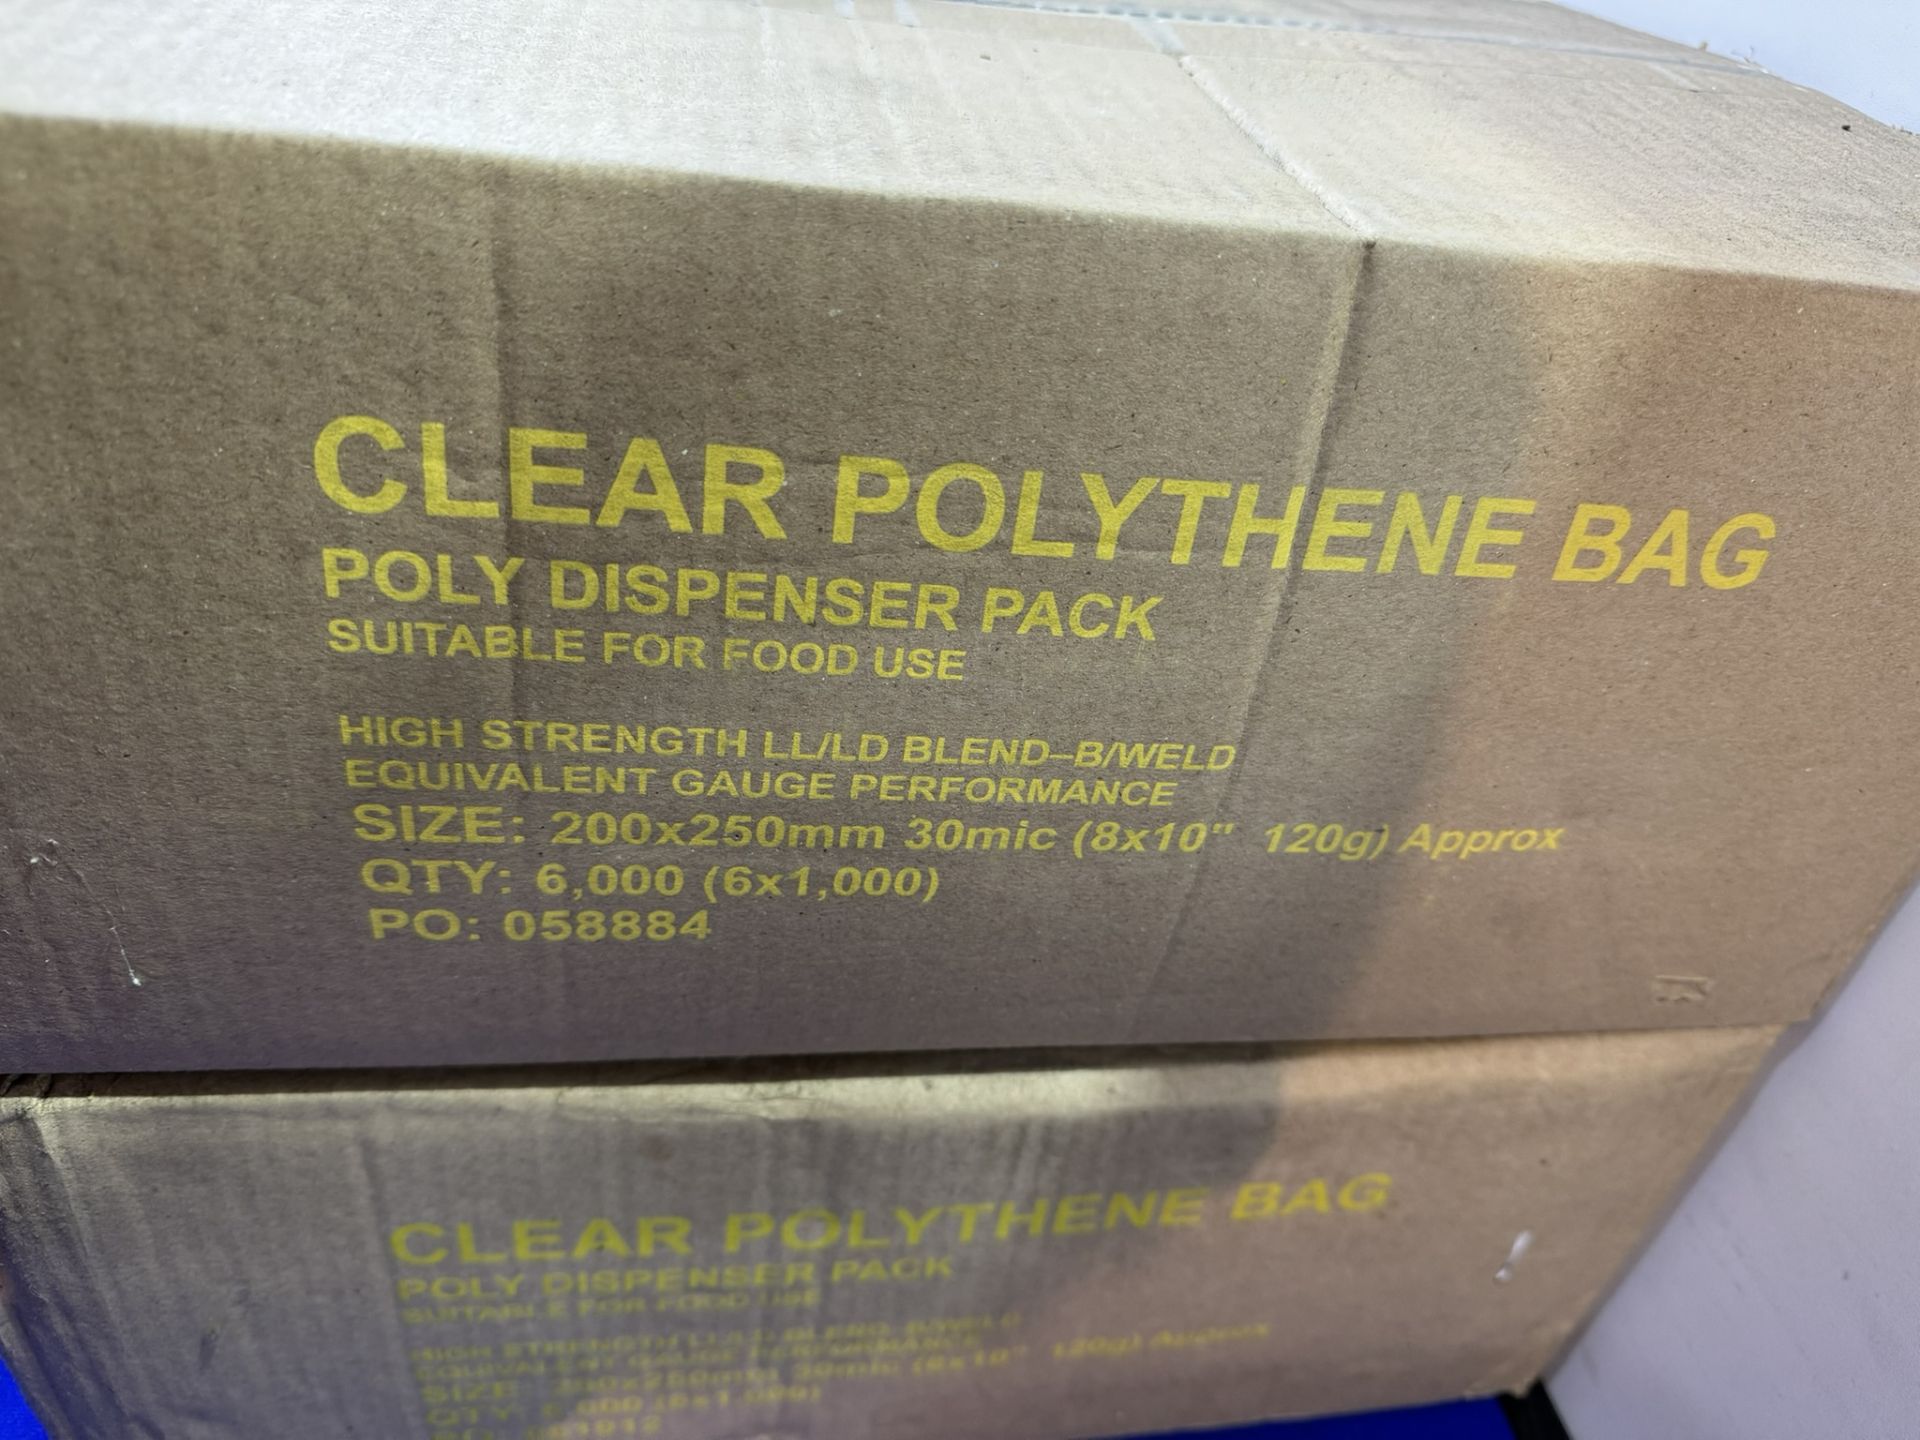 2 x Boxes Of Unbranded Clear Polythene Bags | 8 x 10 inch - Image 2 of 3